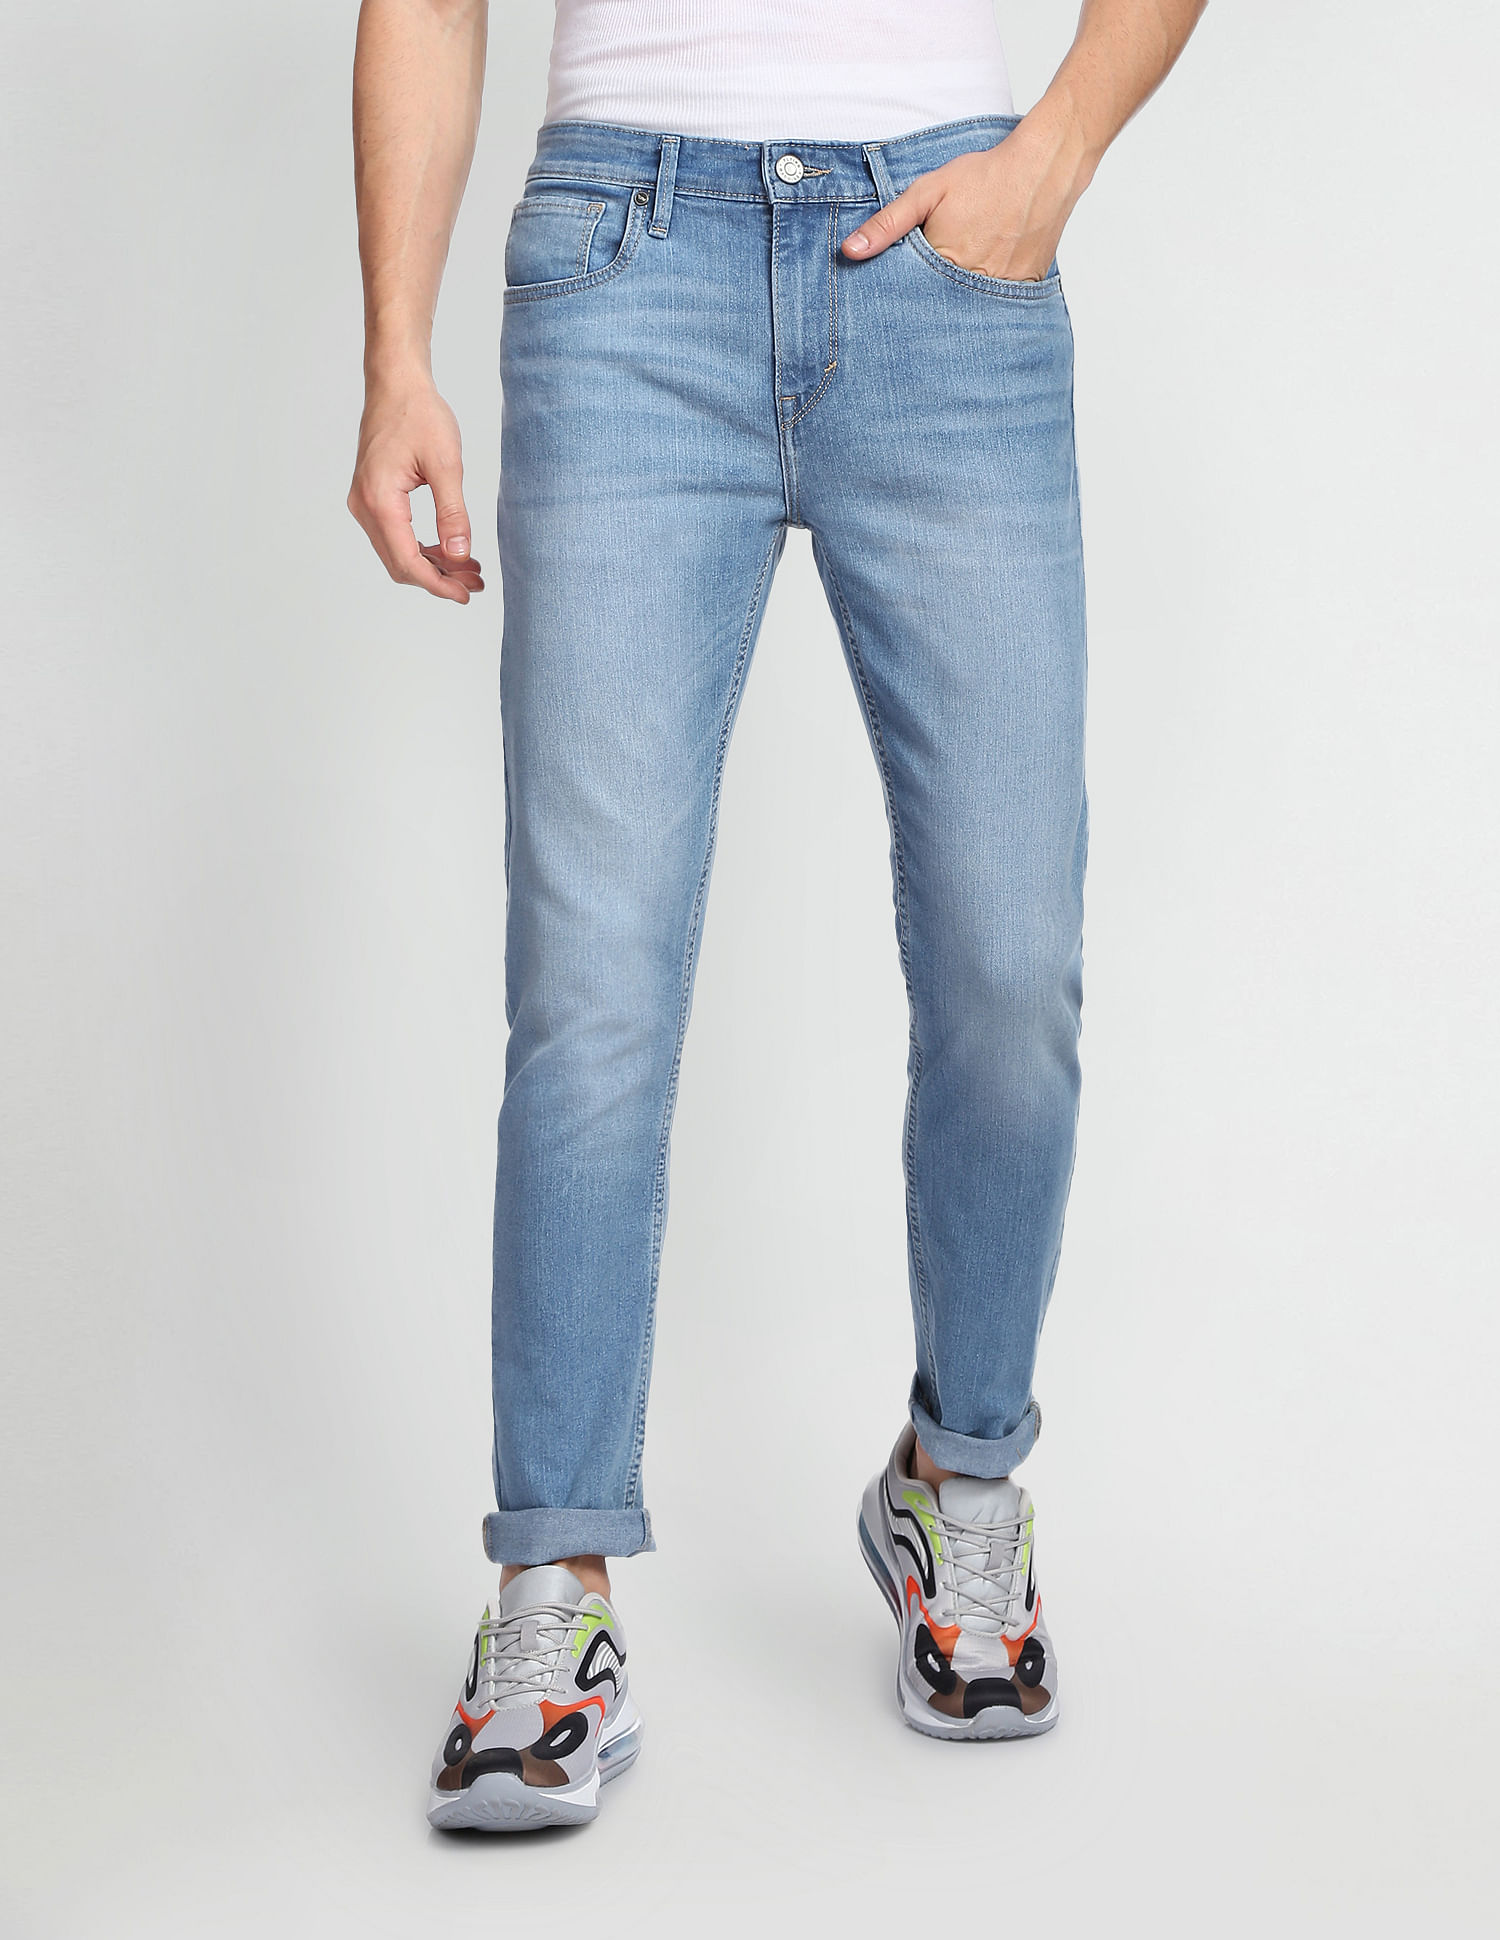 Shop skatedeluxe Mystery Jeans (blue stone washed) online | skatedeluxe-saigonsouth.com.vn